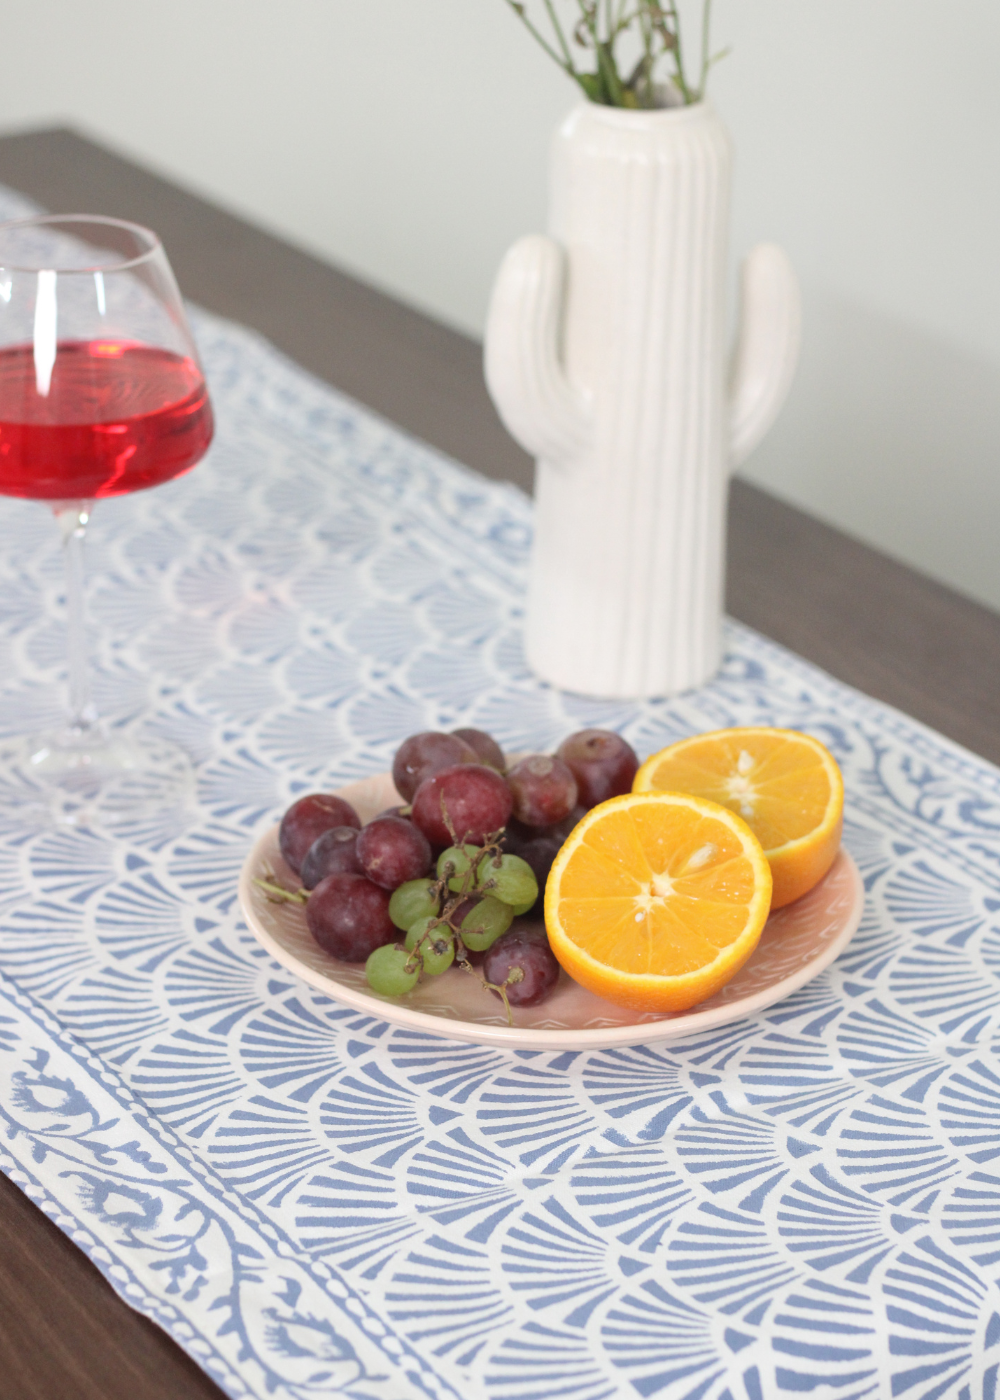 Blue chevron table runner with fruits & juice